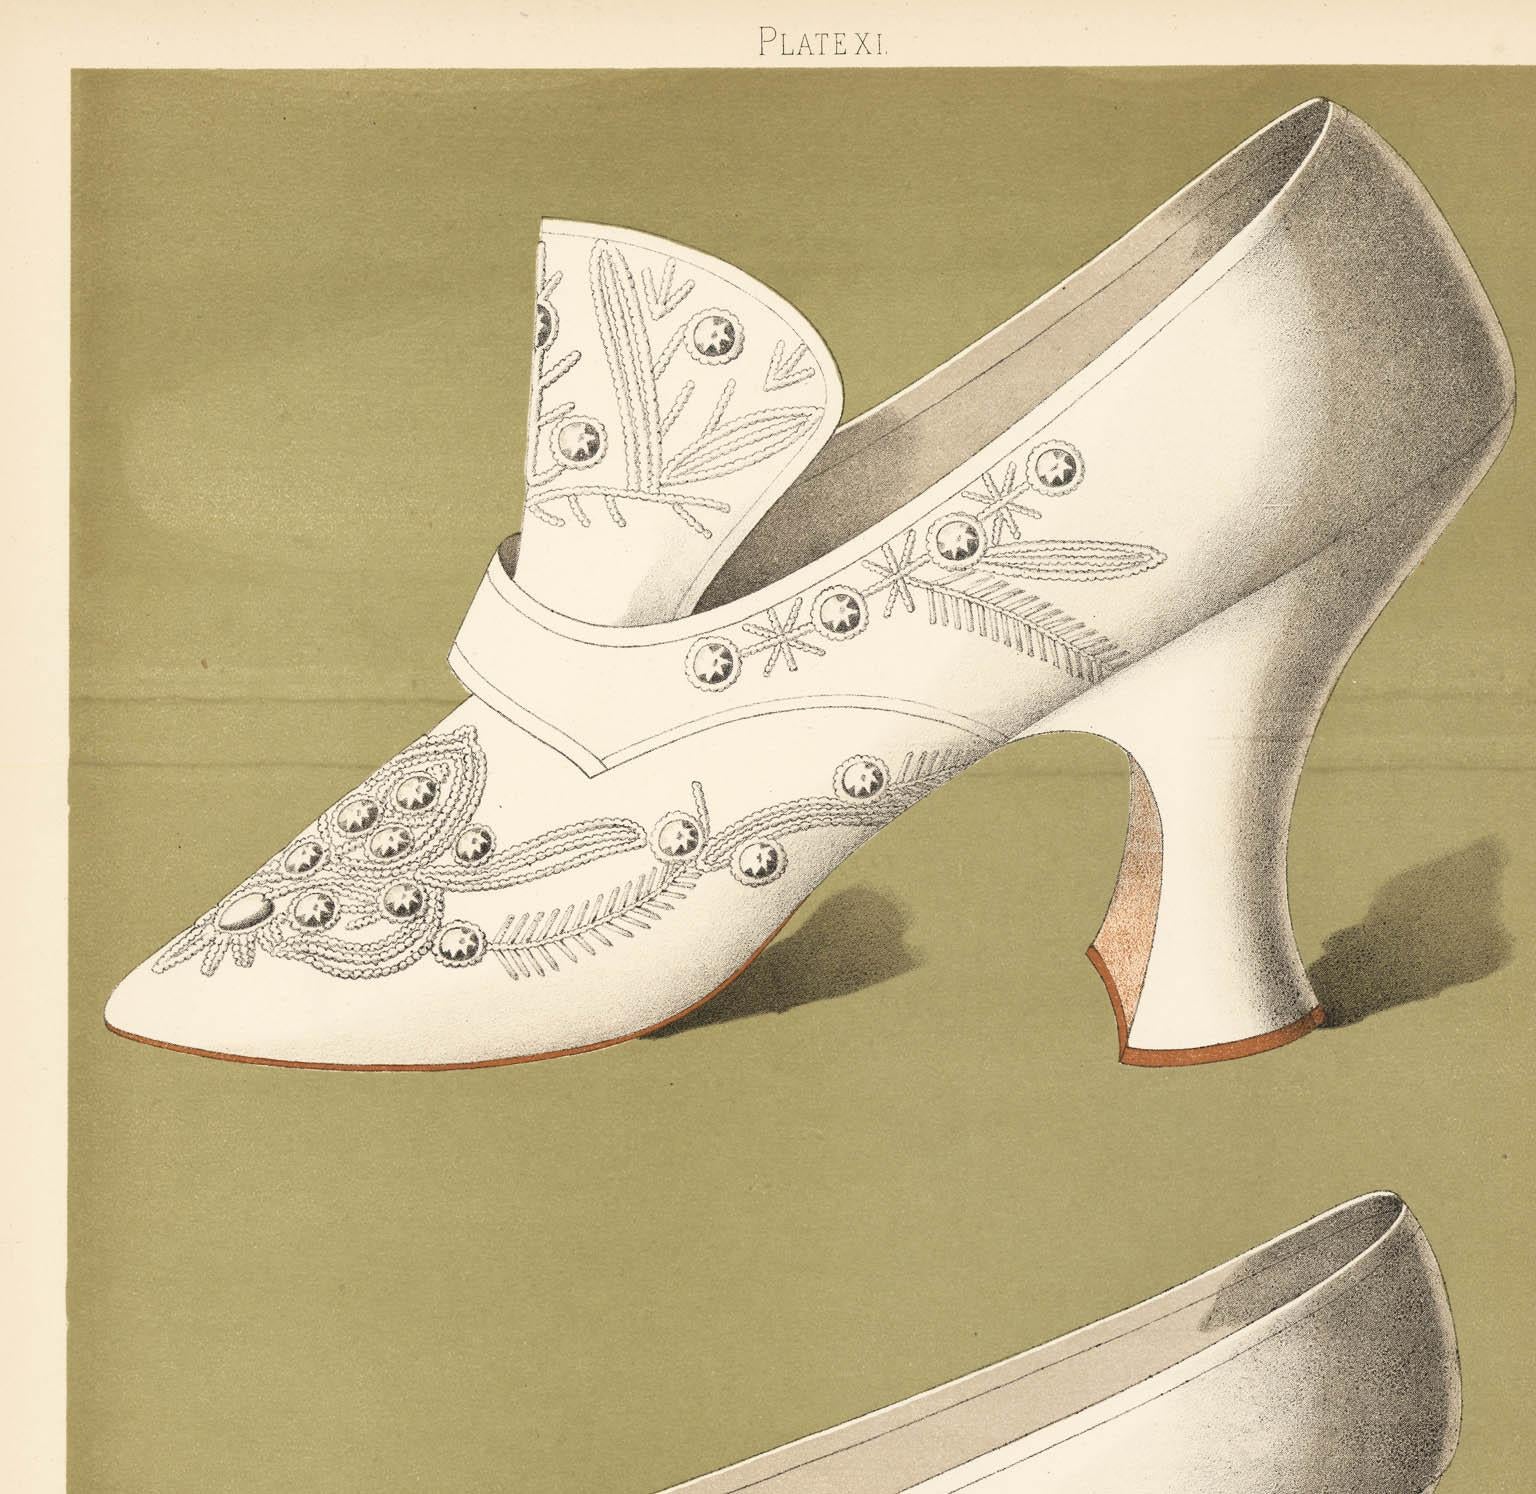 Ladies Dress Shoes. Plate XI. - Print by T. Watson Greig